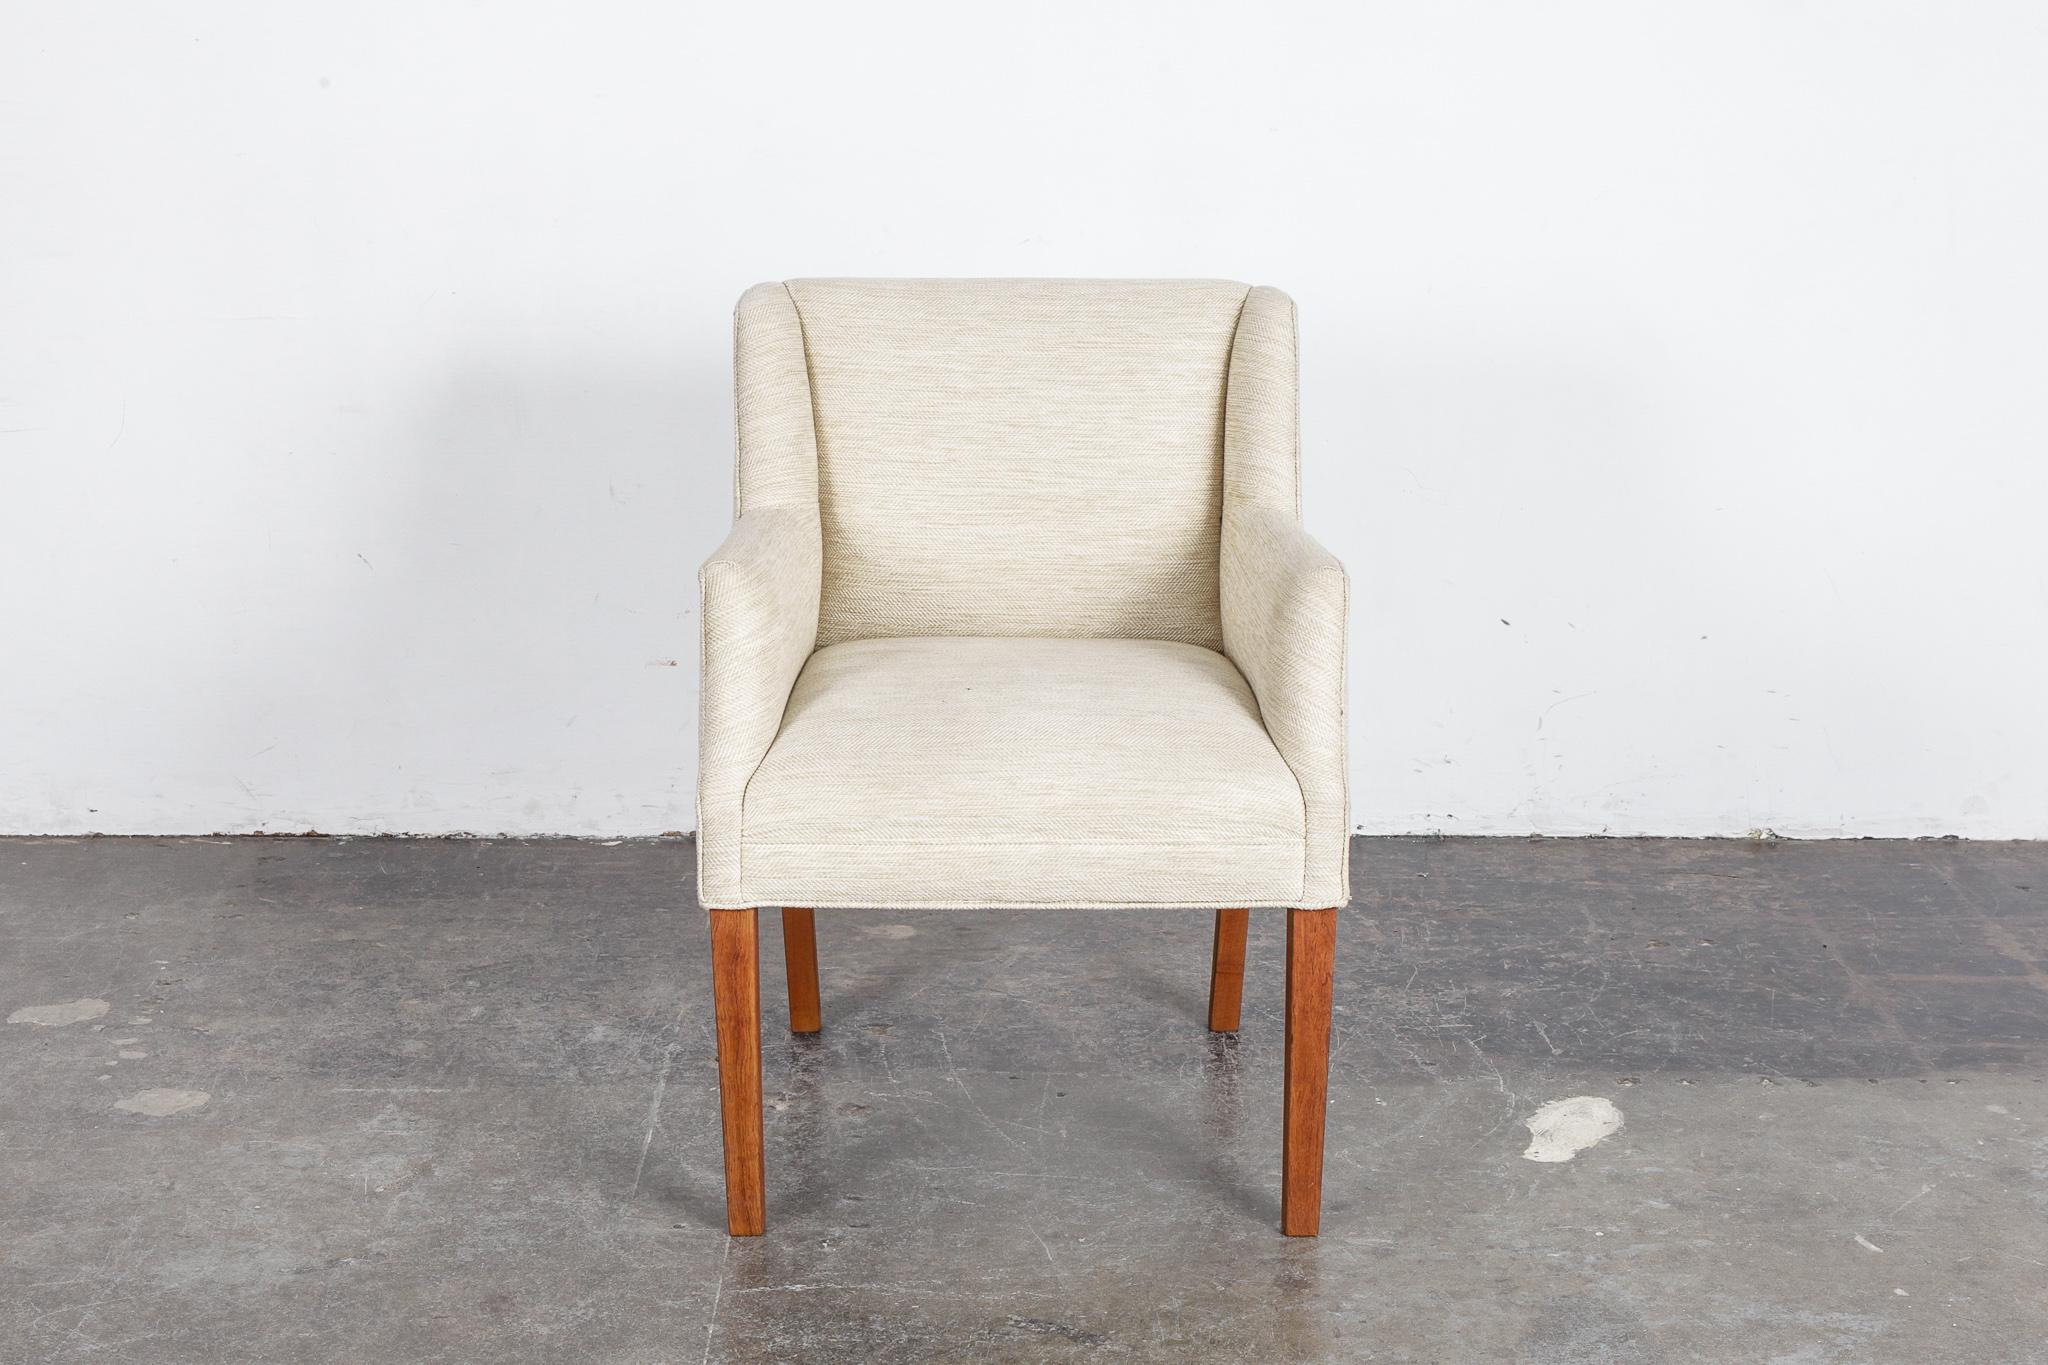 Danish Mid-Century Modern side chair featuring elegantly curved arms and a slightly taller seat height. Newly upholstered in an off white, with hints of yellow, woven fabric. Legs have been refinished in a natural oil finish. Nice lines especially